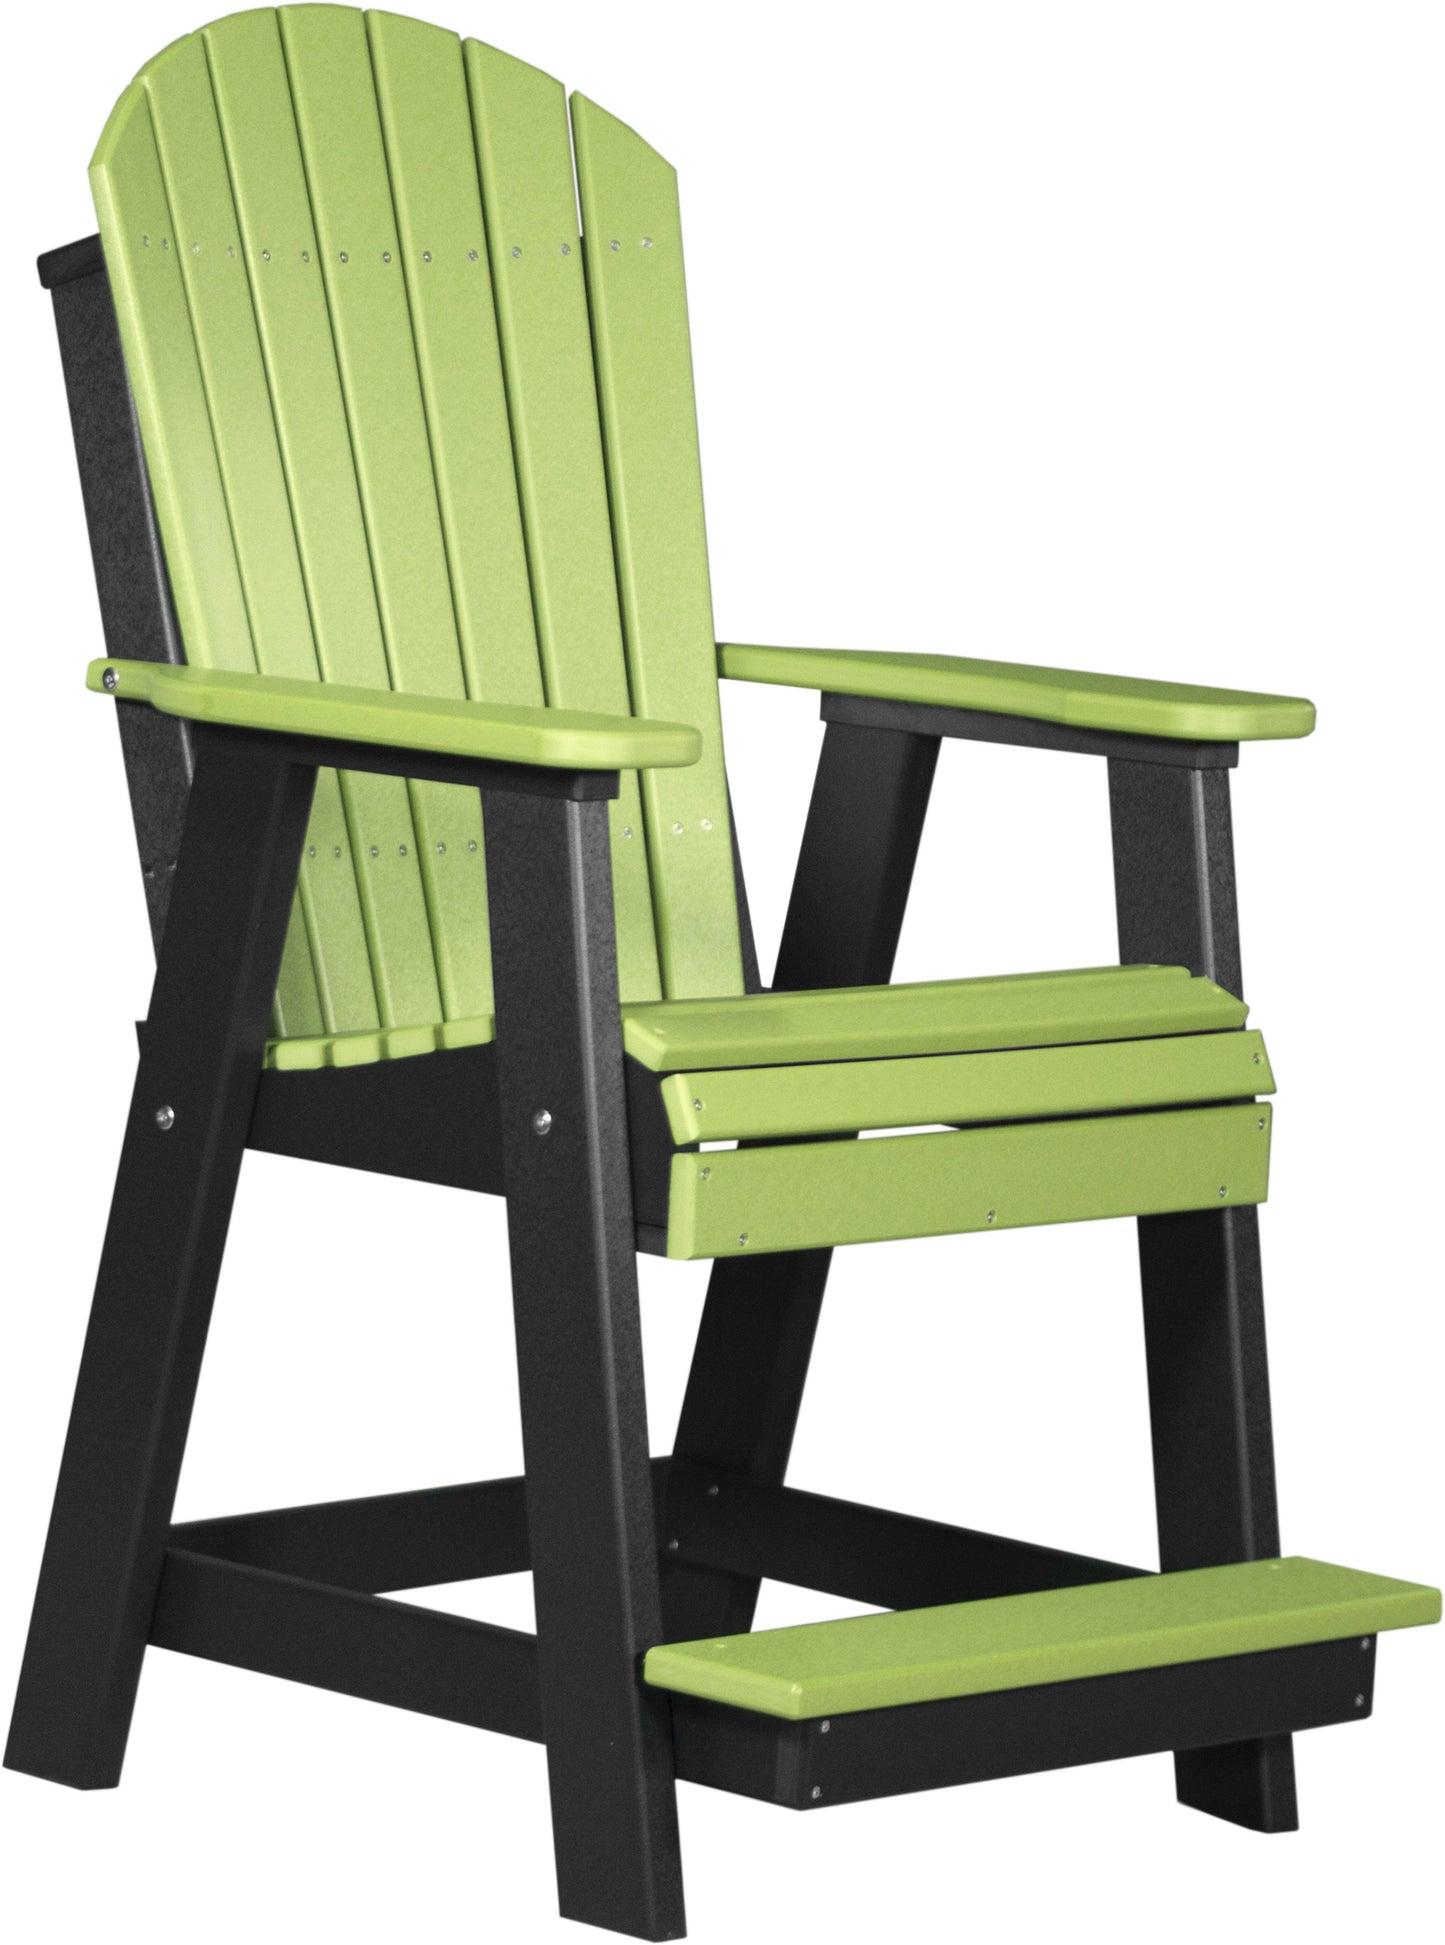 luxcraft counter height recycled plastic adirondack balcony chair lime green on black